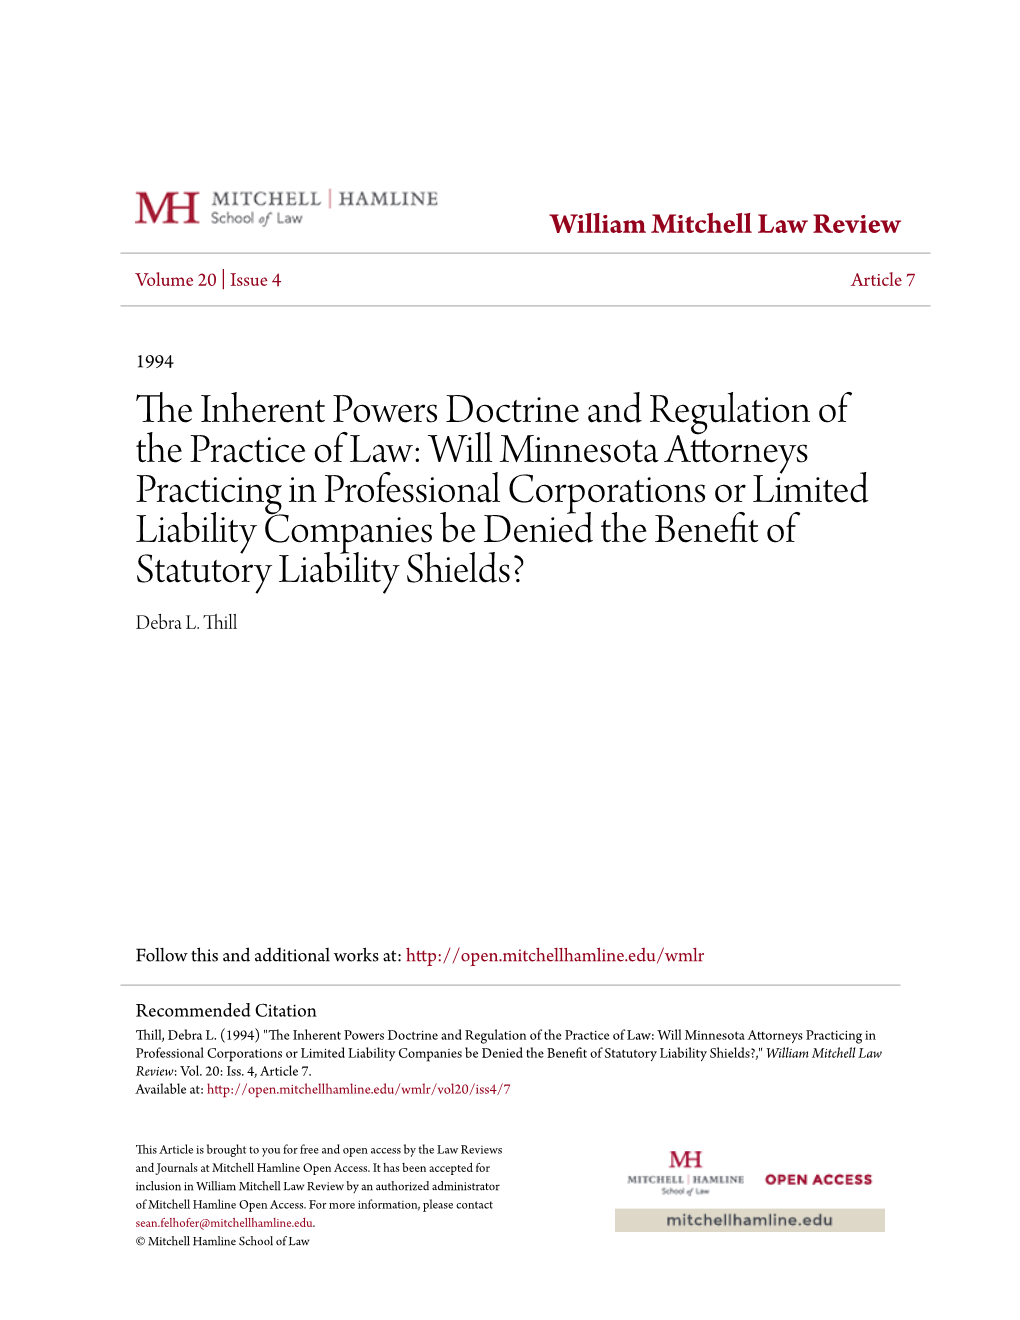 The Inherent Powers Doctrine and Regulation of the Practice of La